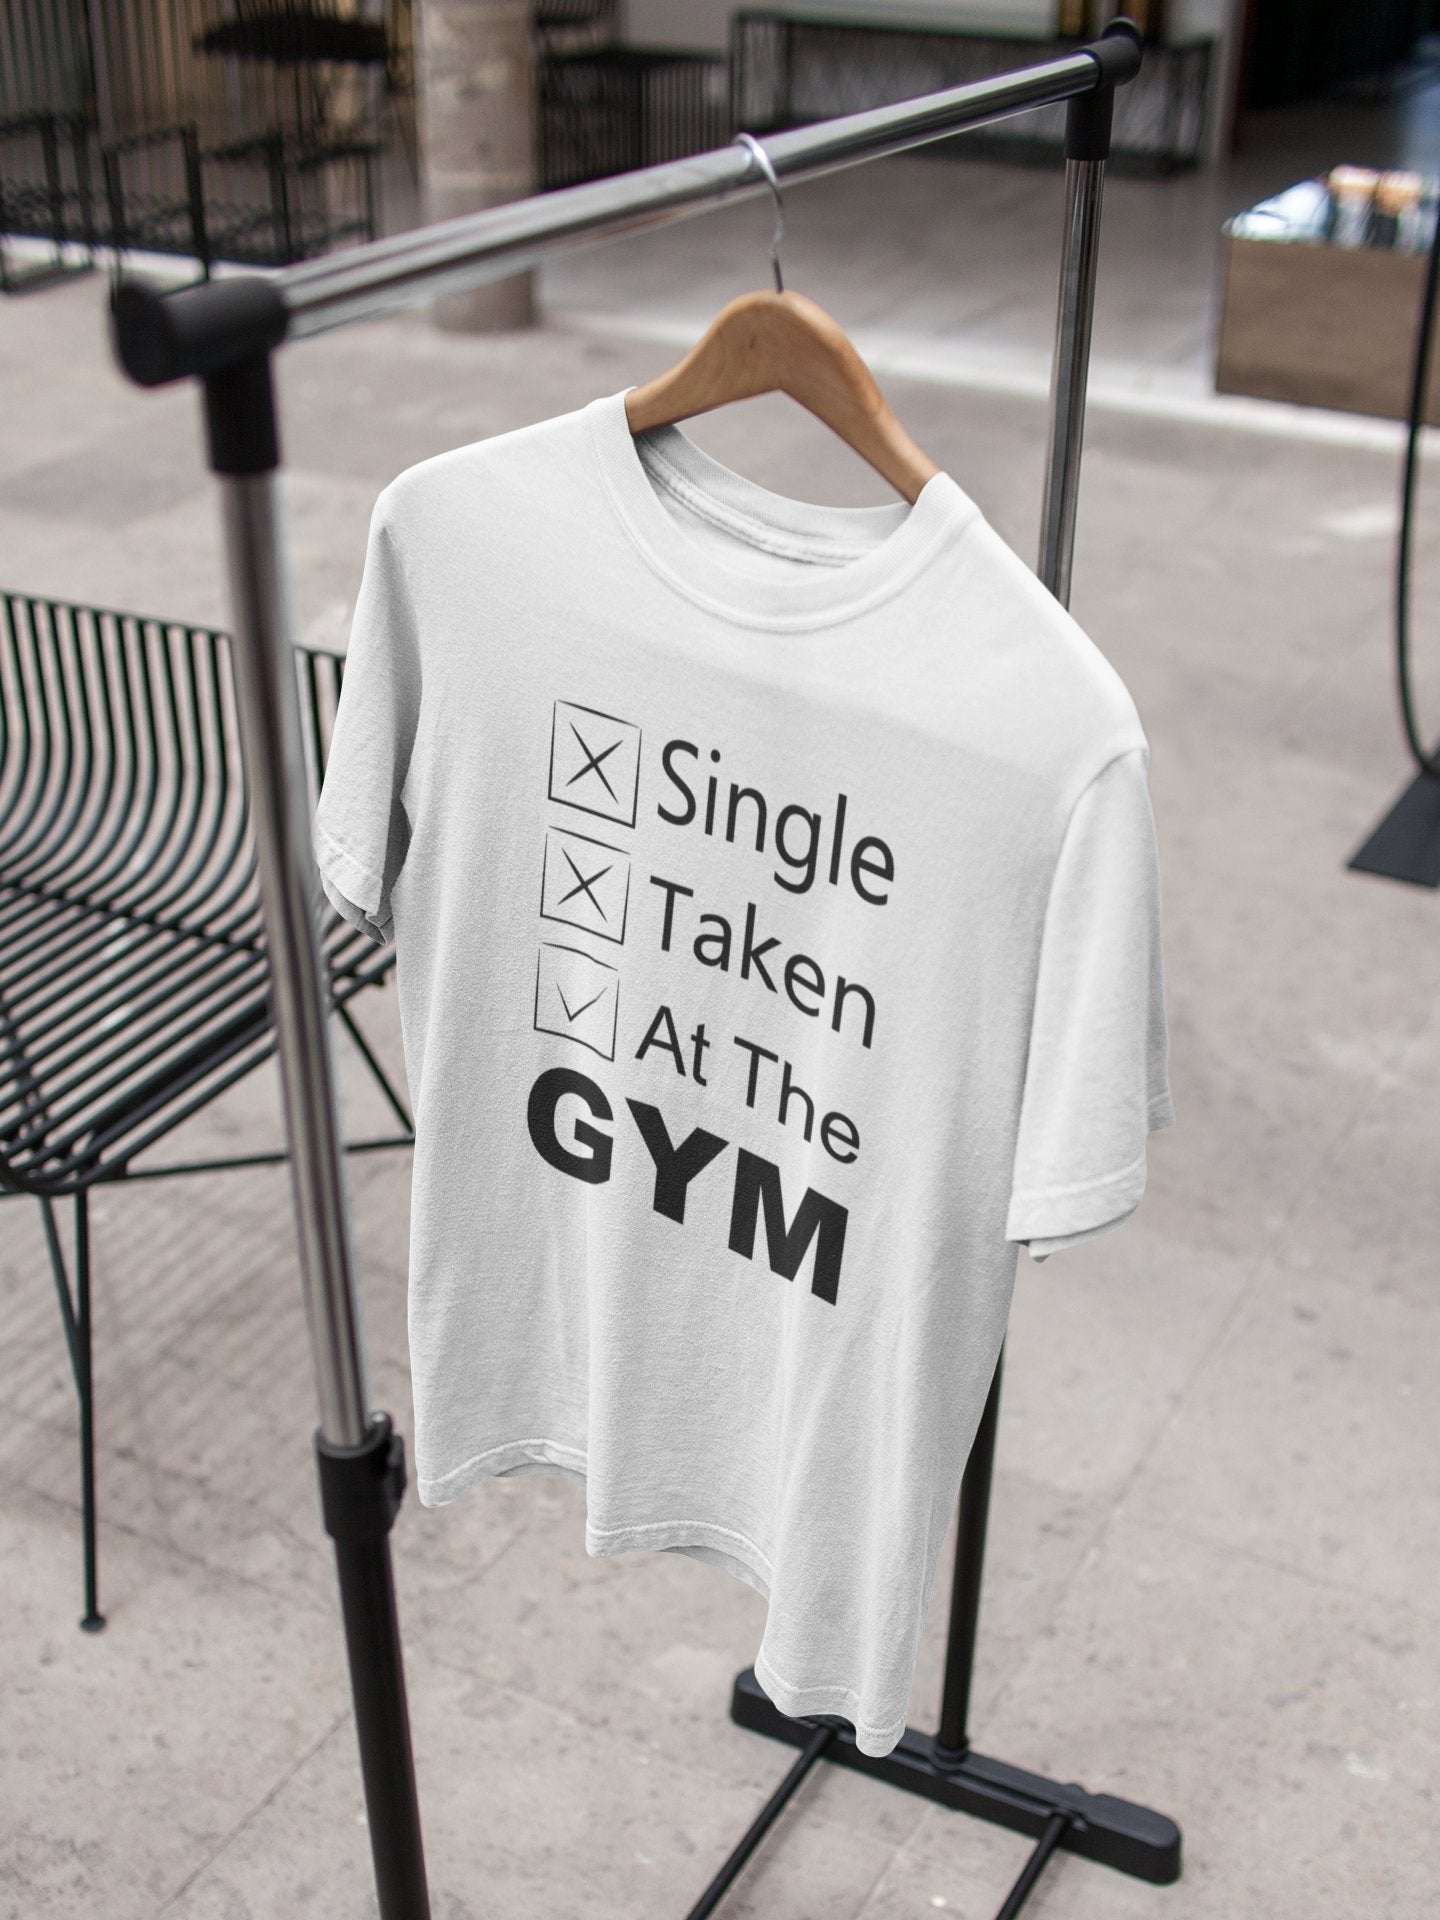 Single Taken At The Gym And Workout Women Half Sleeves T-shirt- FunkyTeesClub - Funky Tees Club